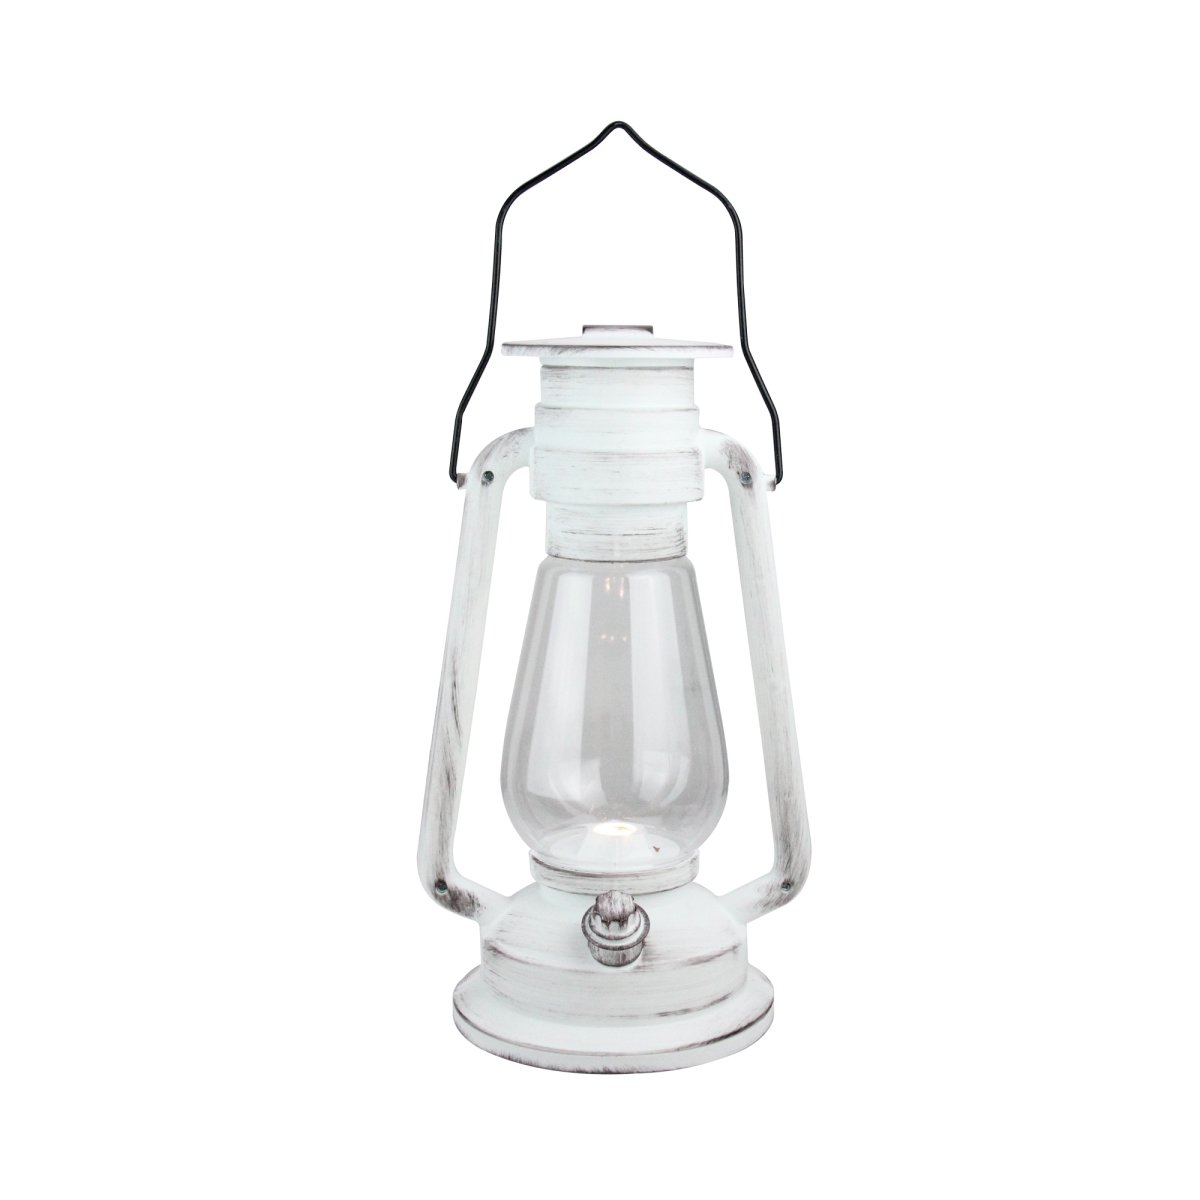 32816141 12 In. Black Brushed & White Traditional Lantern With Bright White Led Light